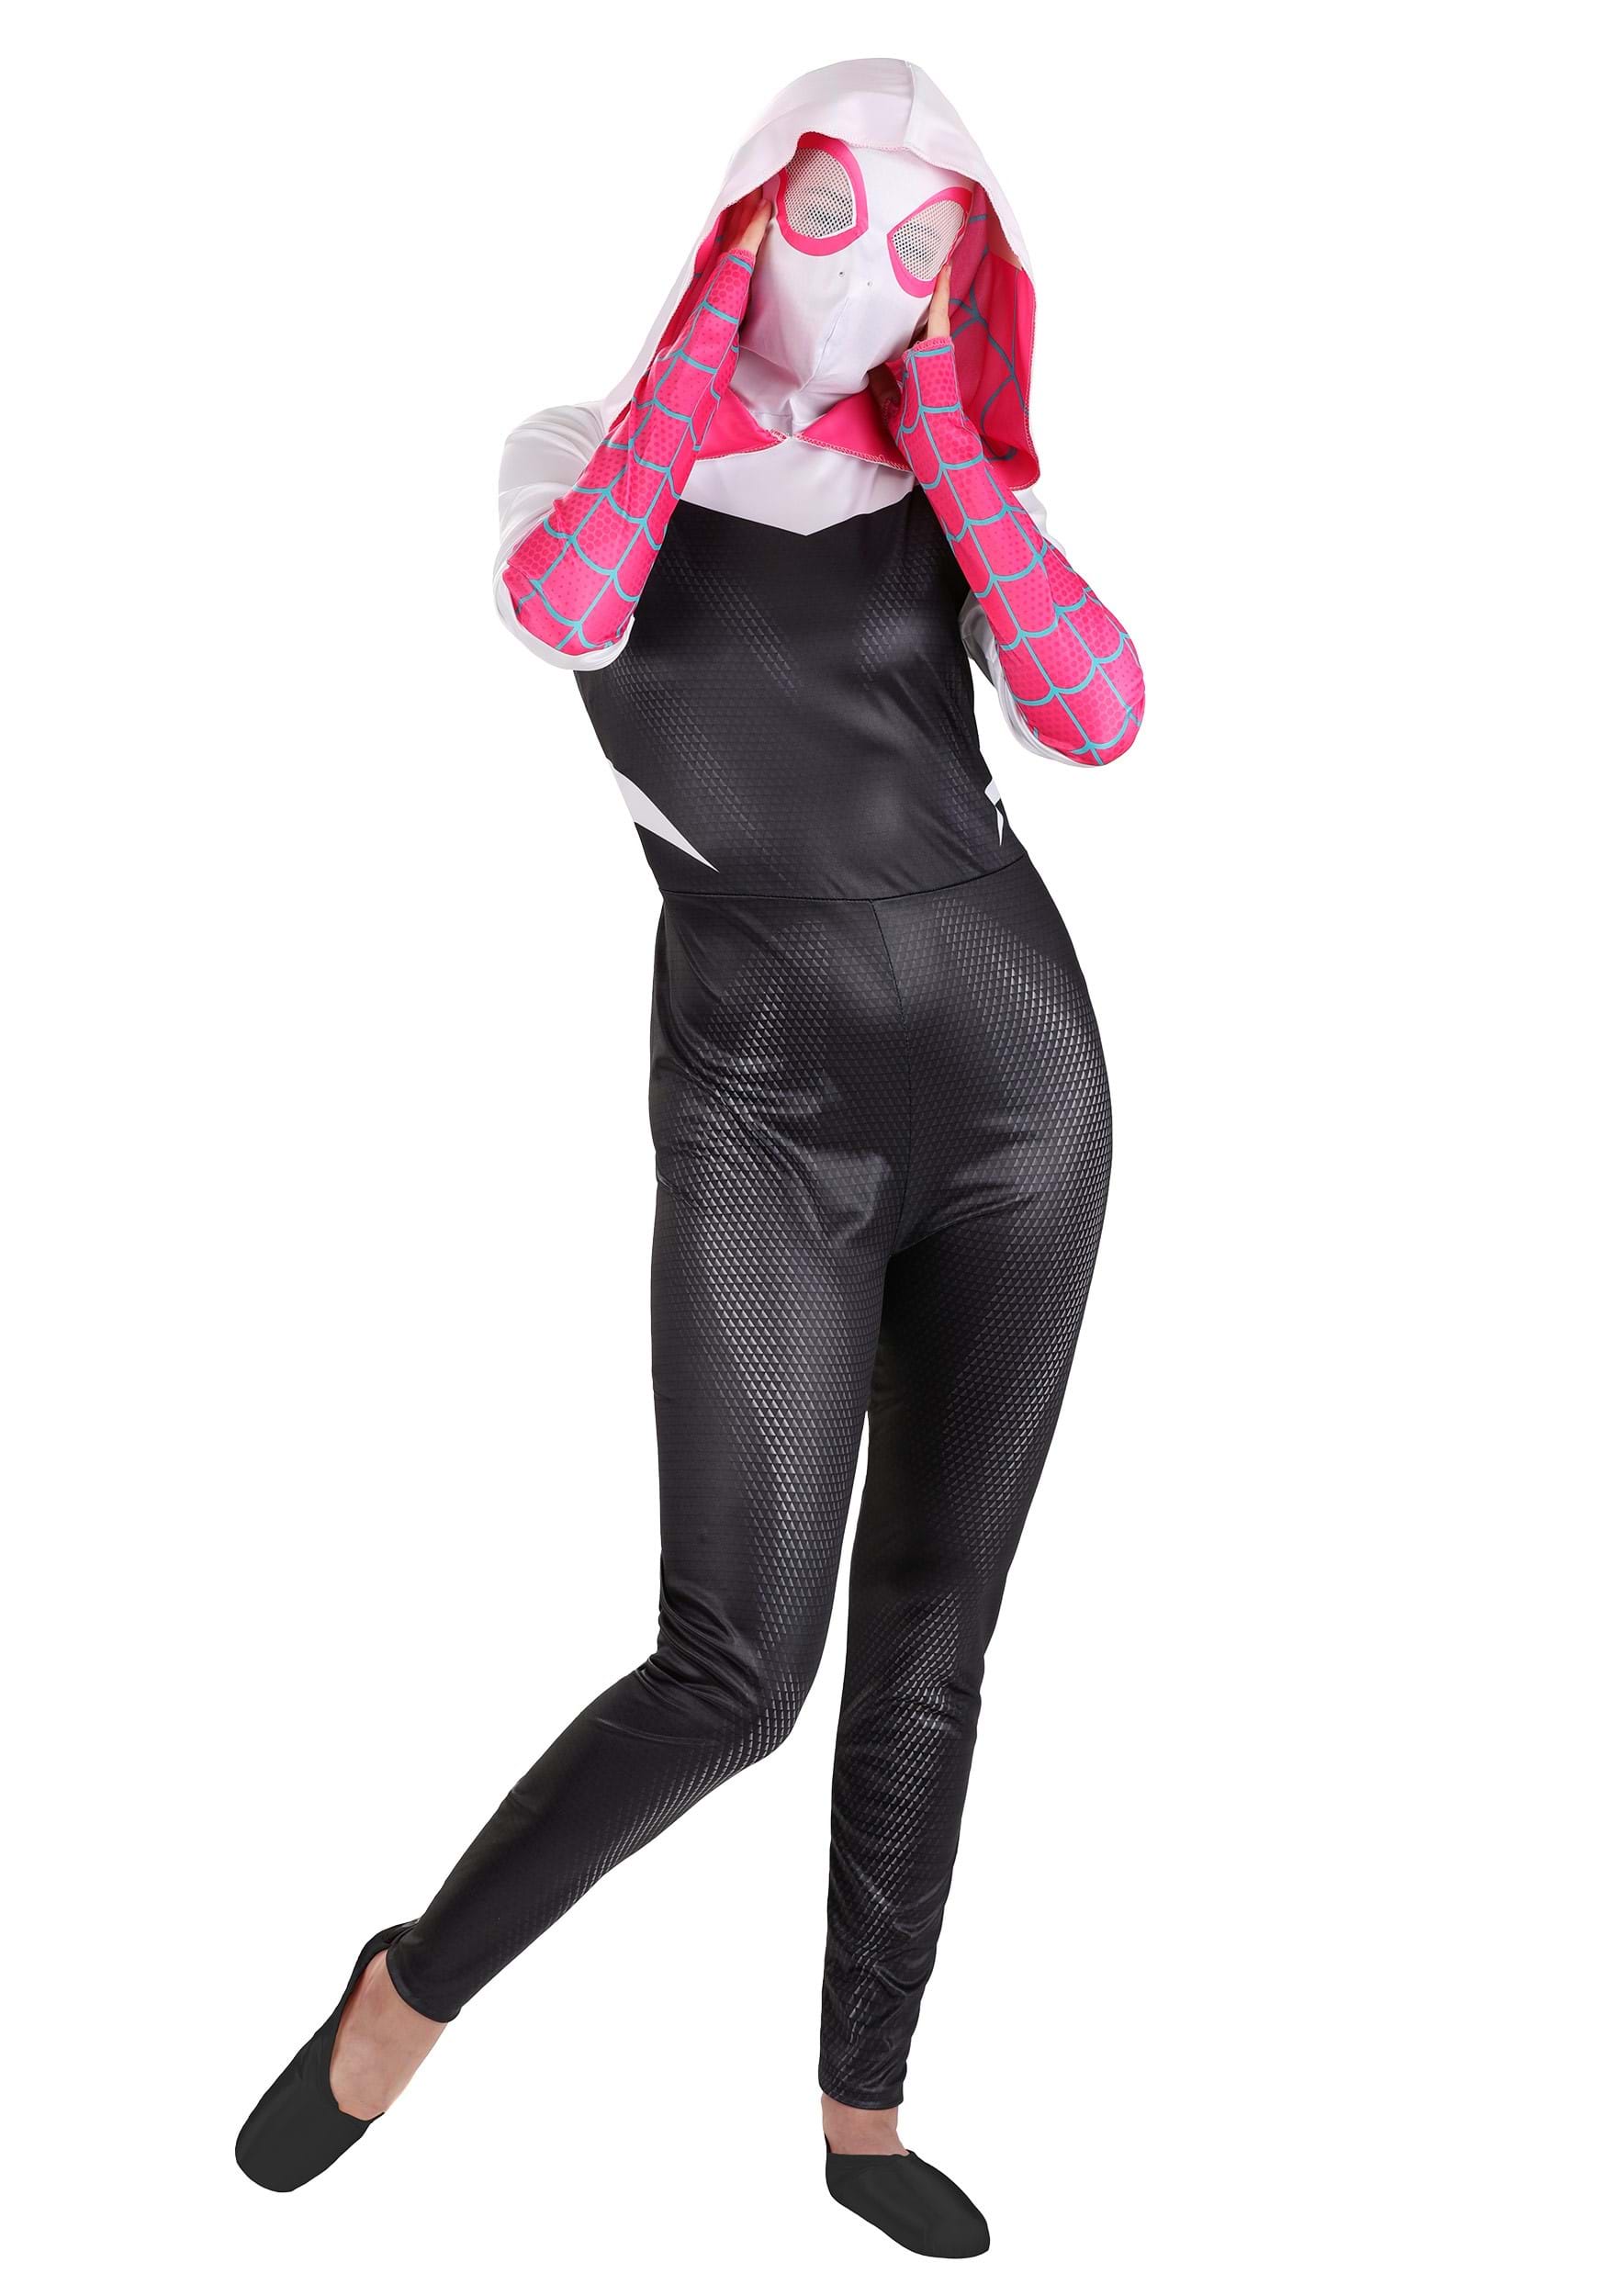 Spider-Gwen Adult Costume pic